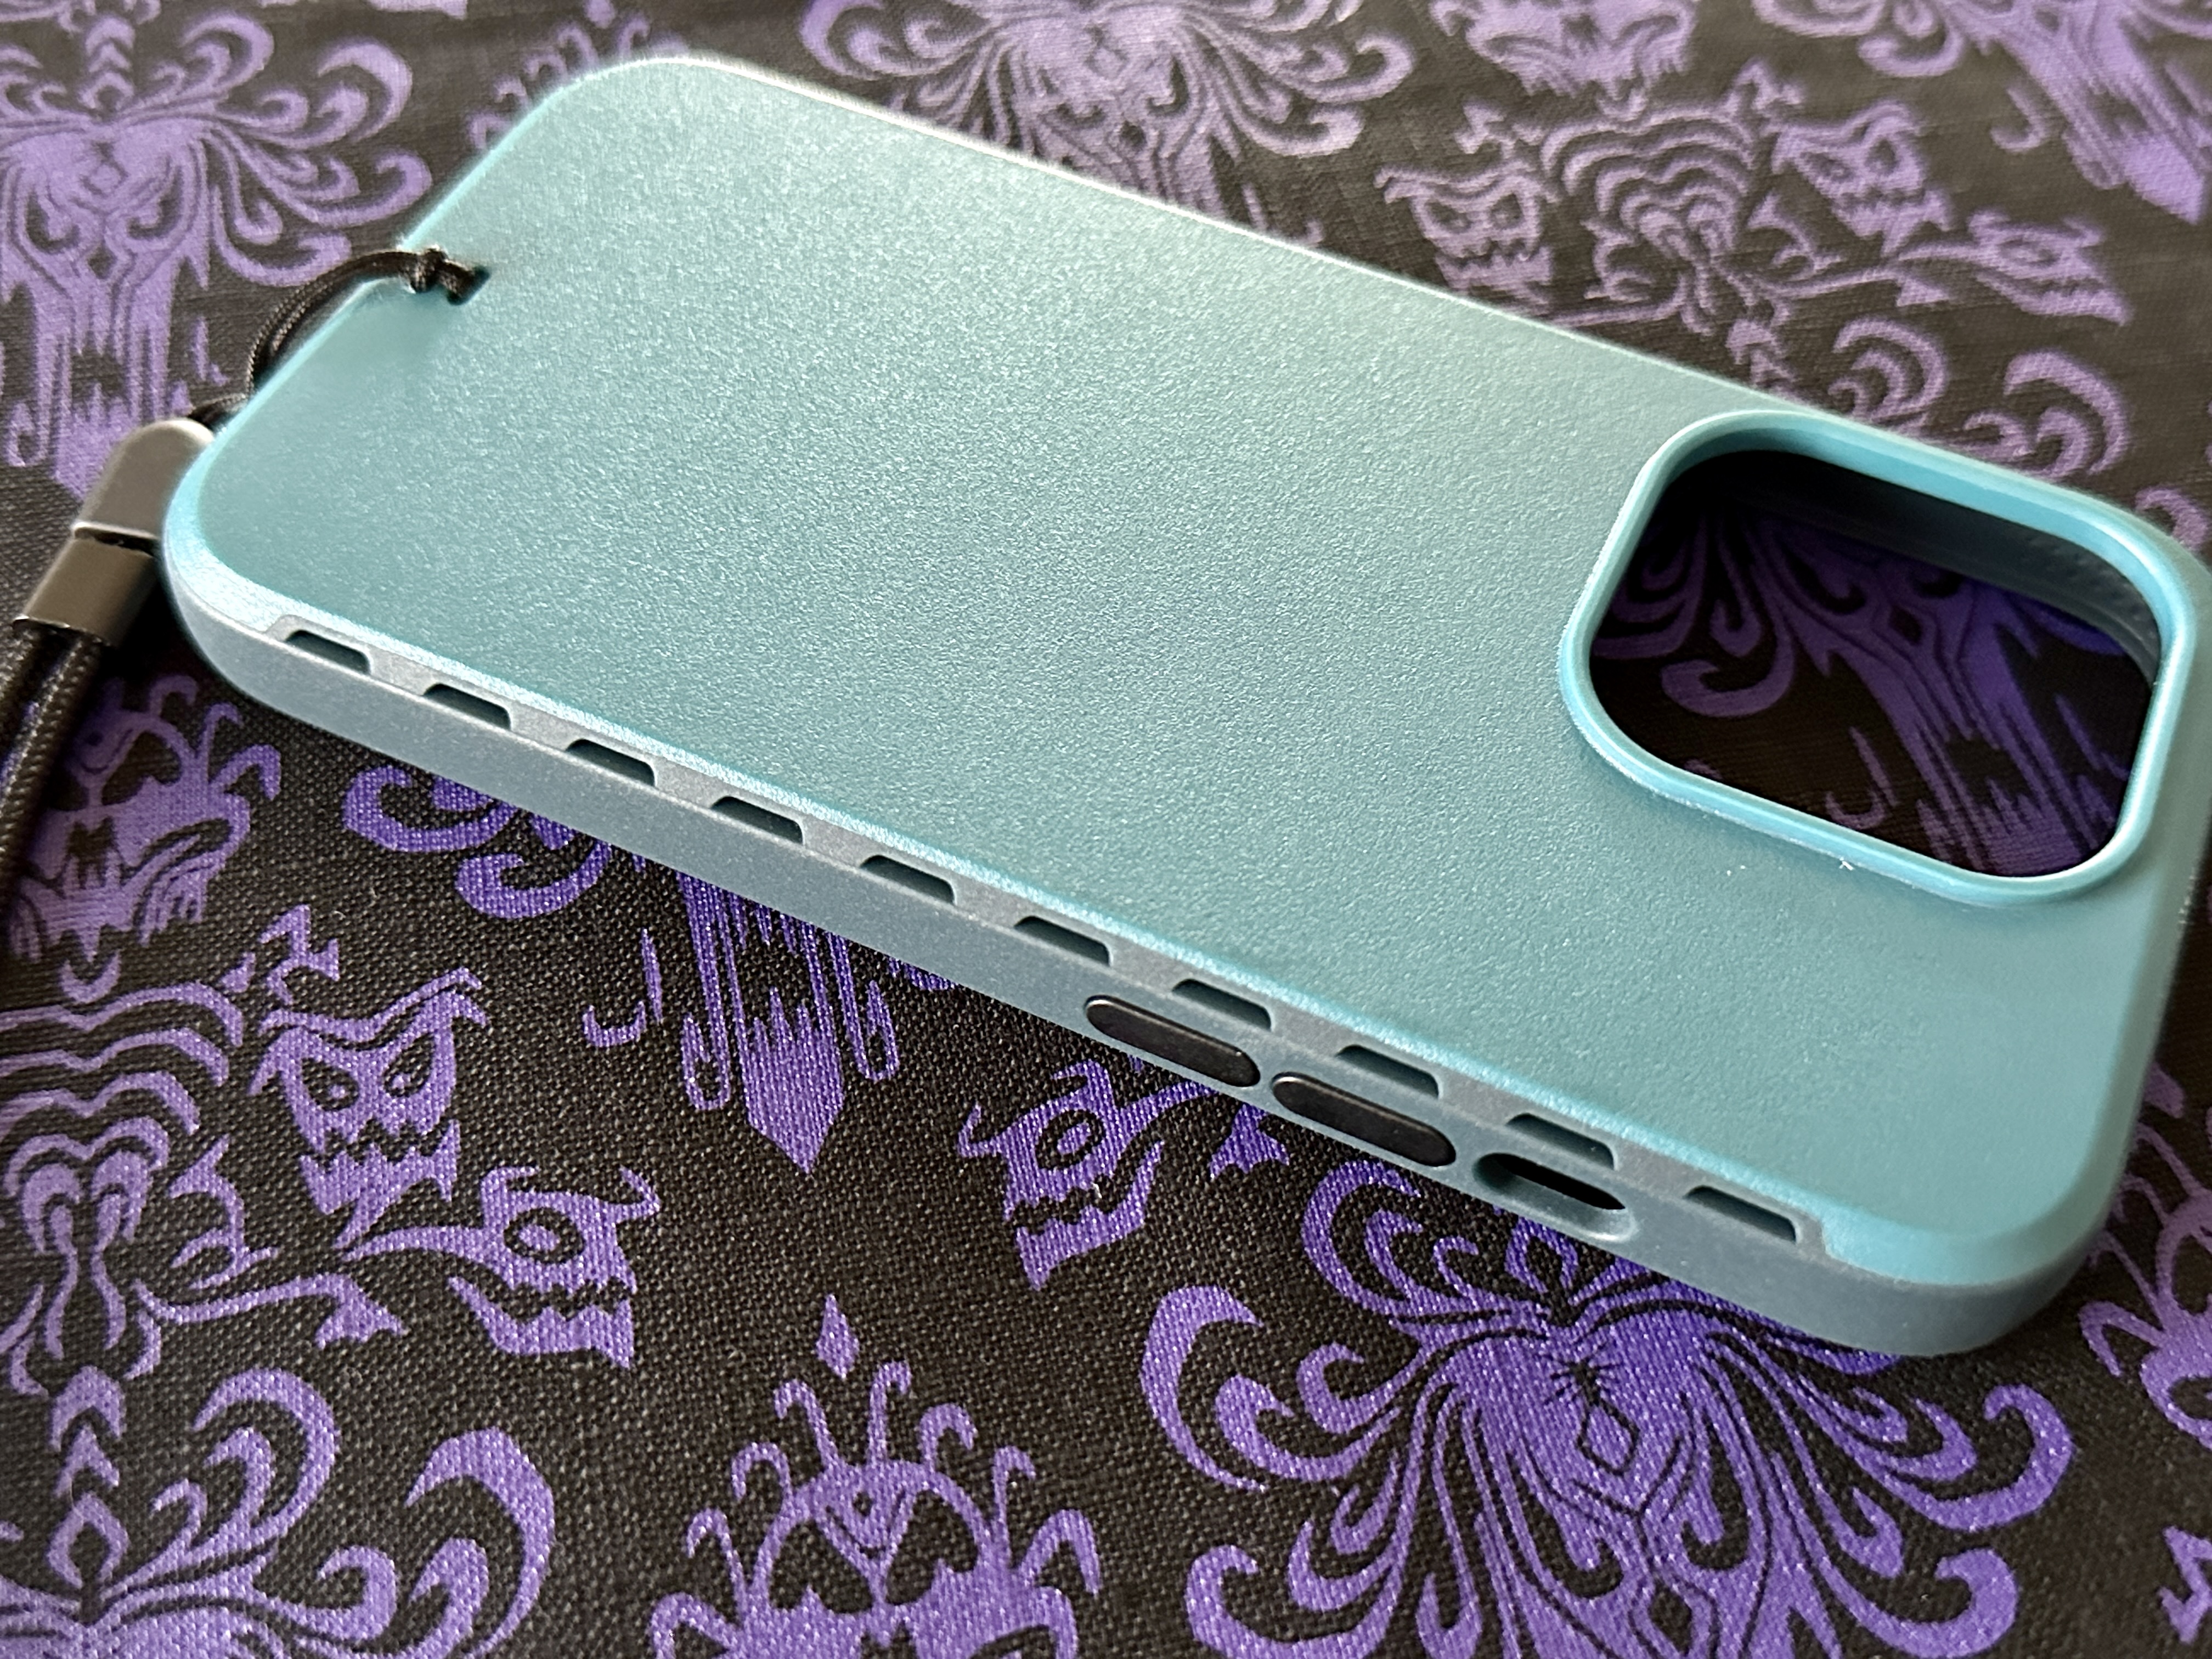 BodyGuardz Paradigm Pro for iPhone 14 Pro case in Hydro showing off side vents without phone inside.